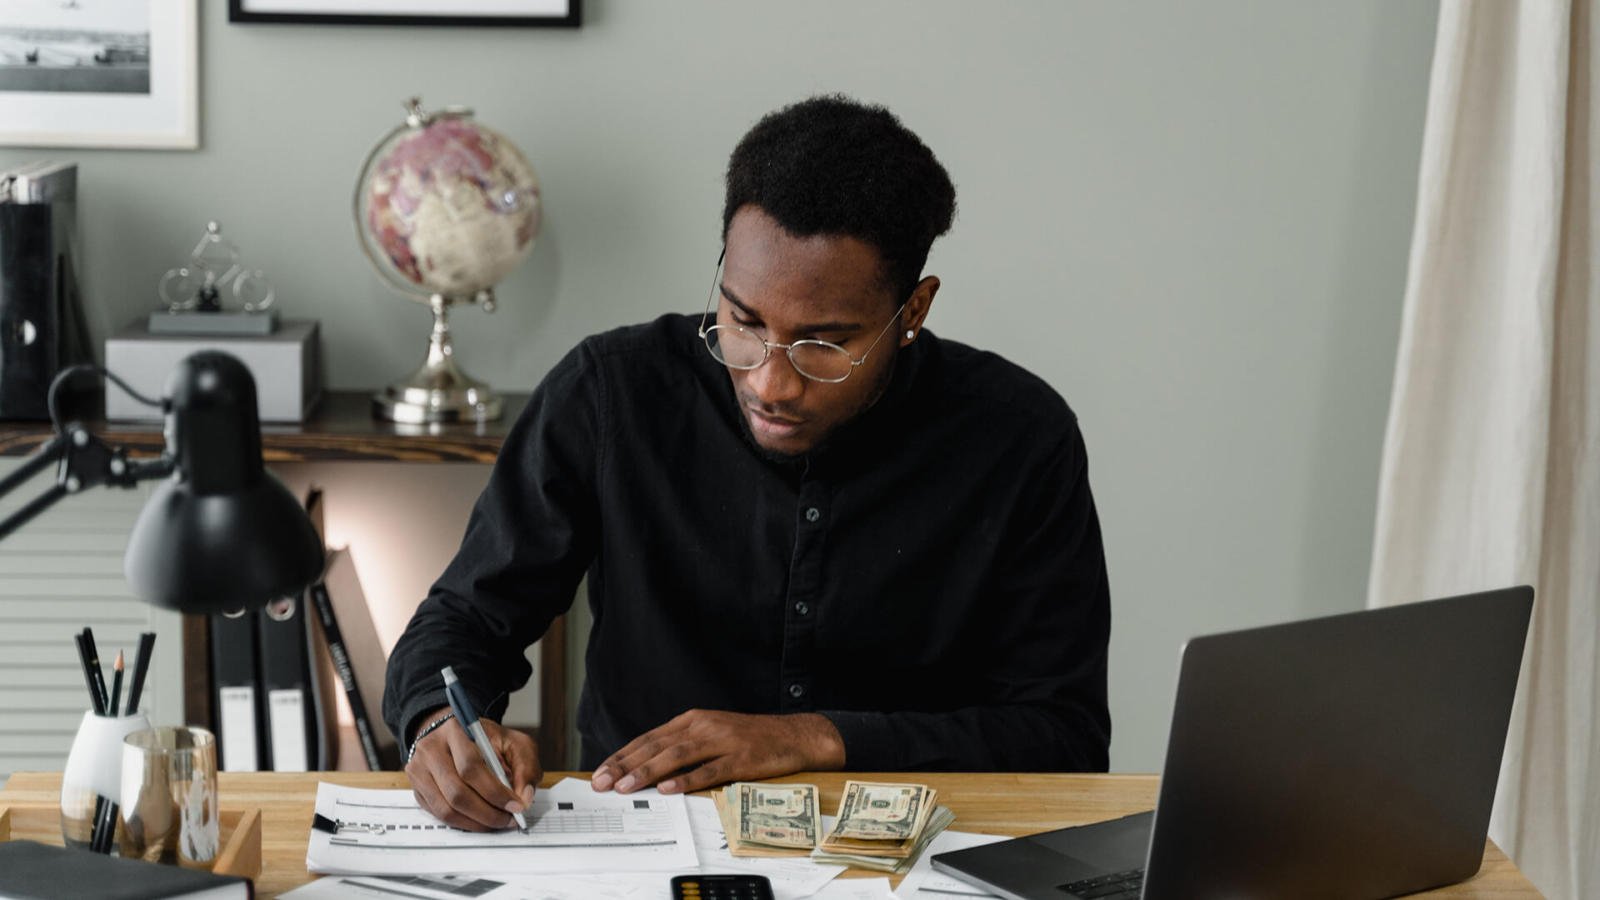 An accountant works on budgets and income records